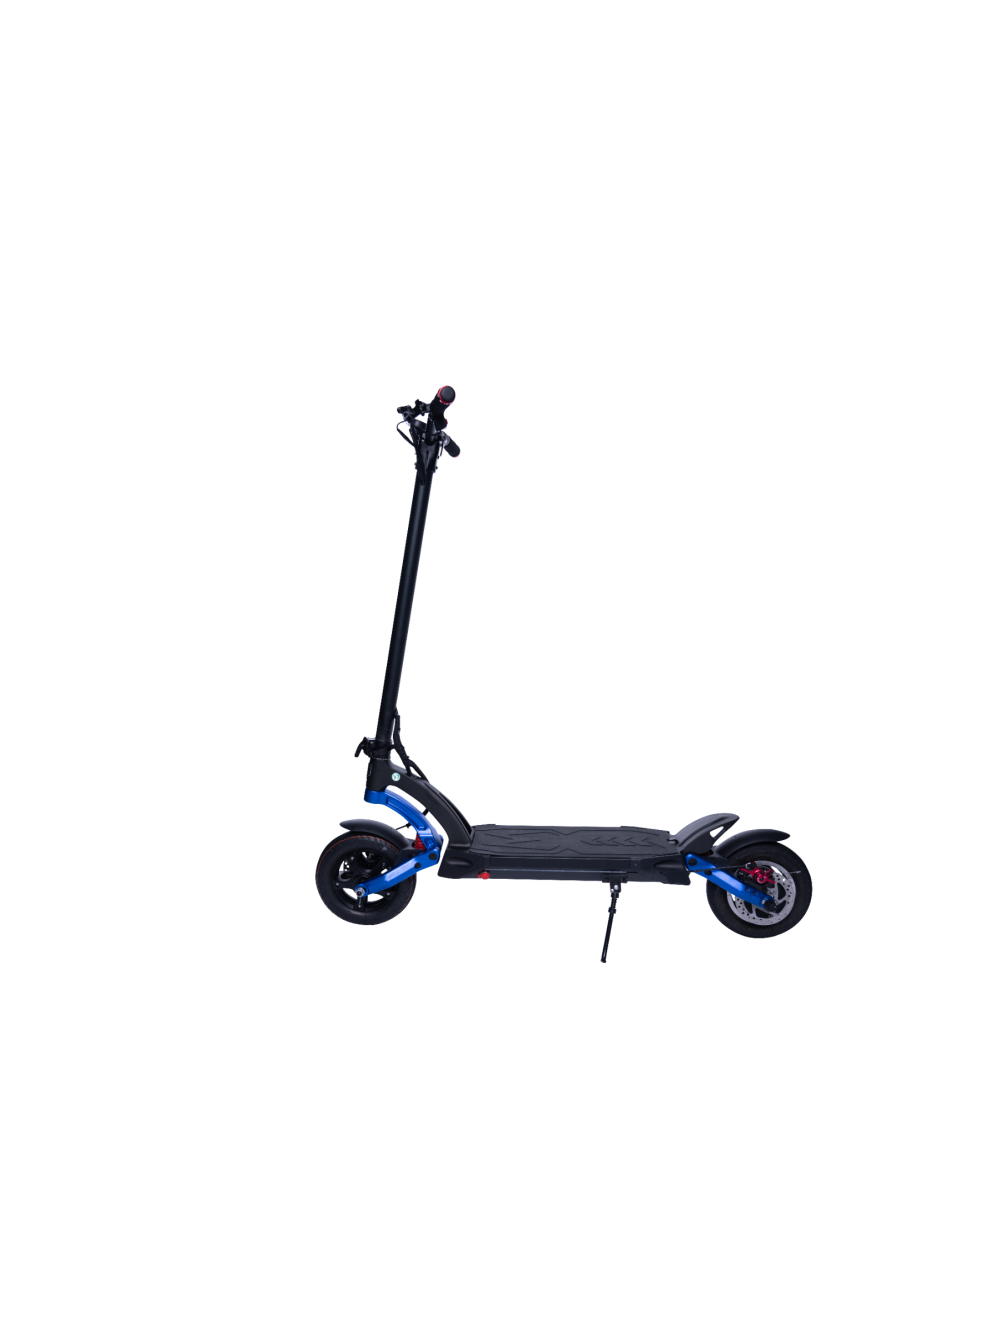 Kaabo Mantis 10 ECO 800 The Kaabo Mantis Lite electric scooter has strong acceleration, excellent performance for those fun weekend rides. A powerful brushless 800W motor delivers acceleration and climb up to 30% inclines with ease. Topspeed: 50 km/h Range: up to 55 km